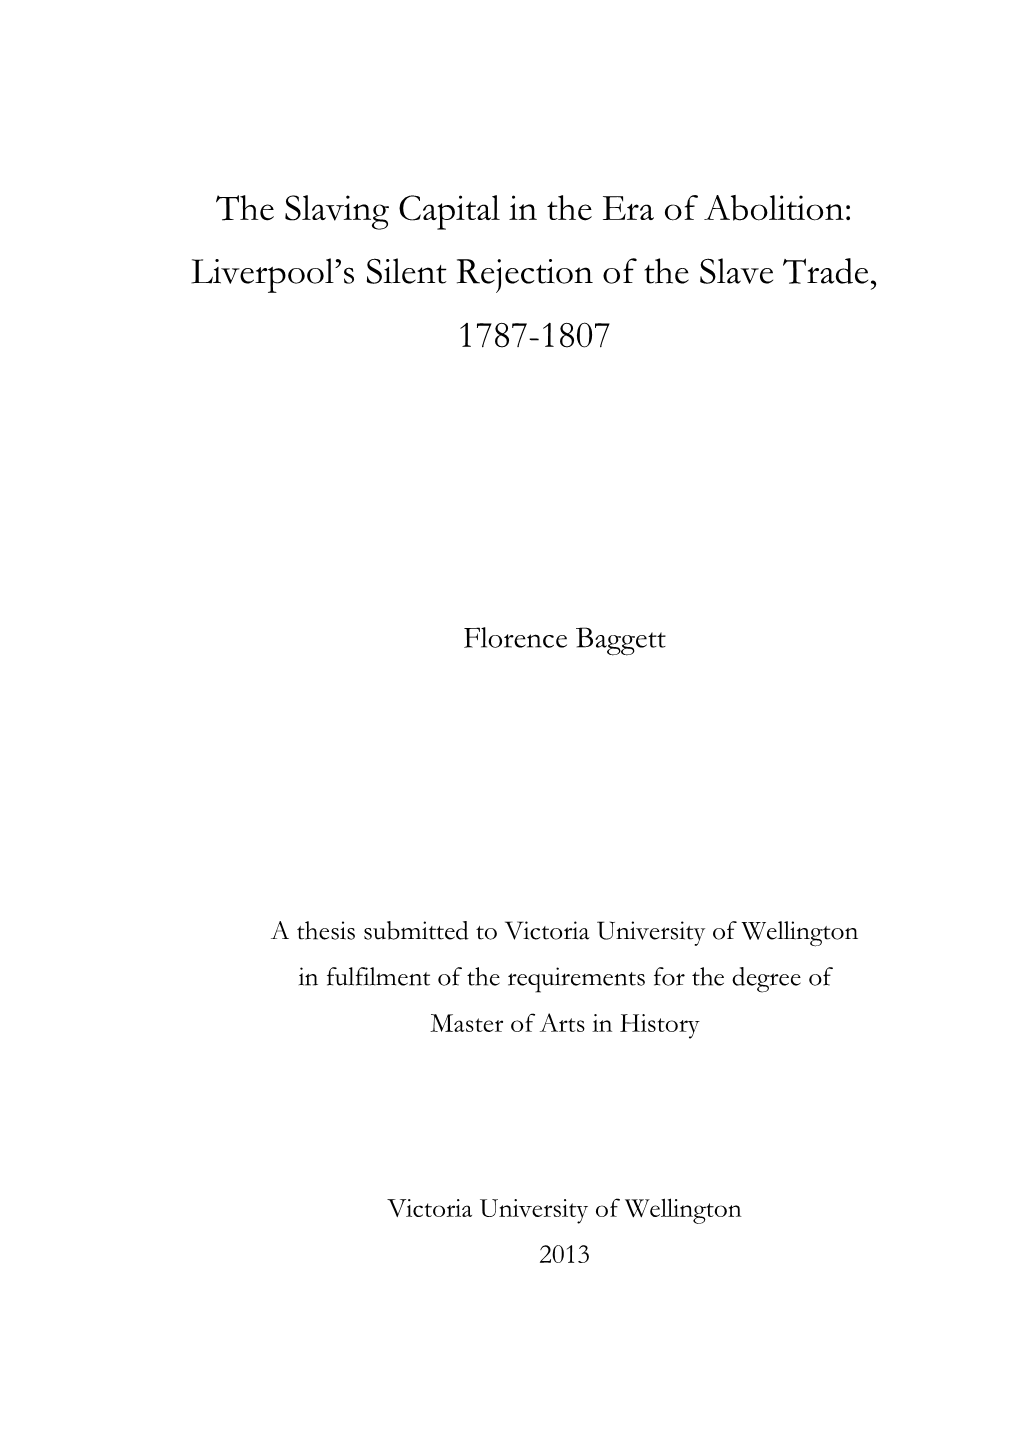 The Slaving Capital in the Era of Abolition: Liverpool's Silent